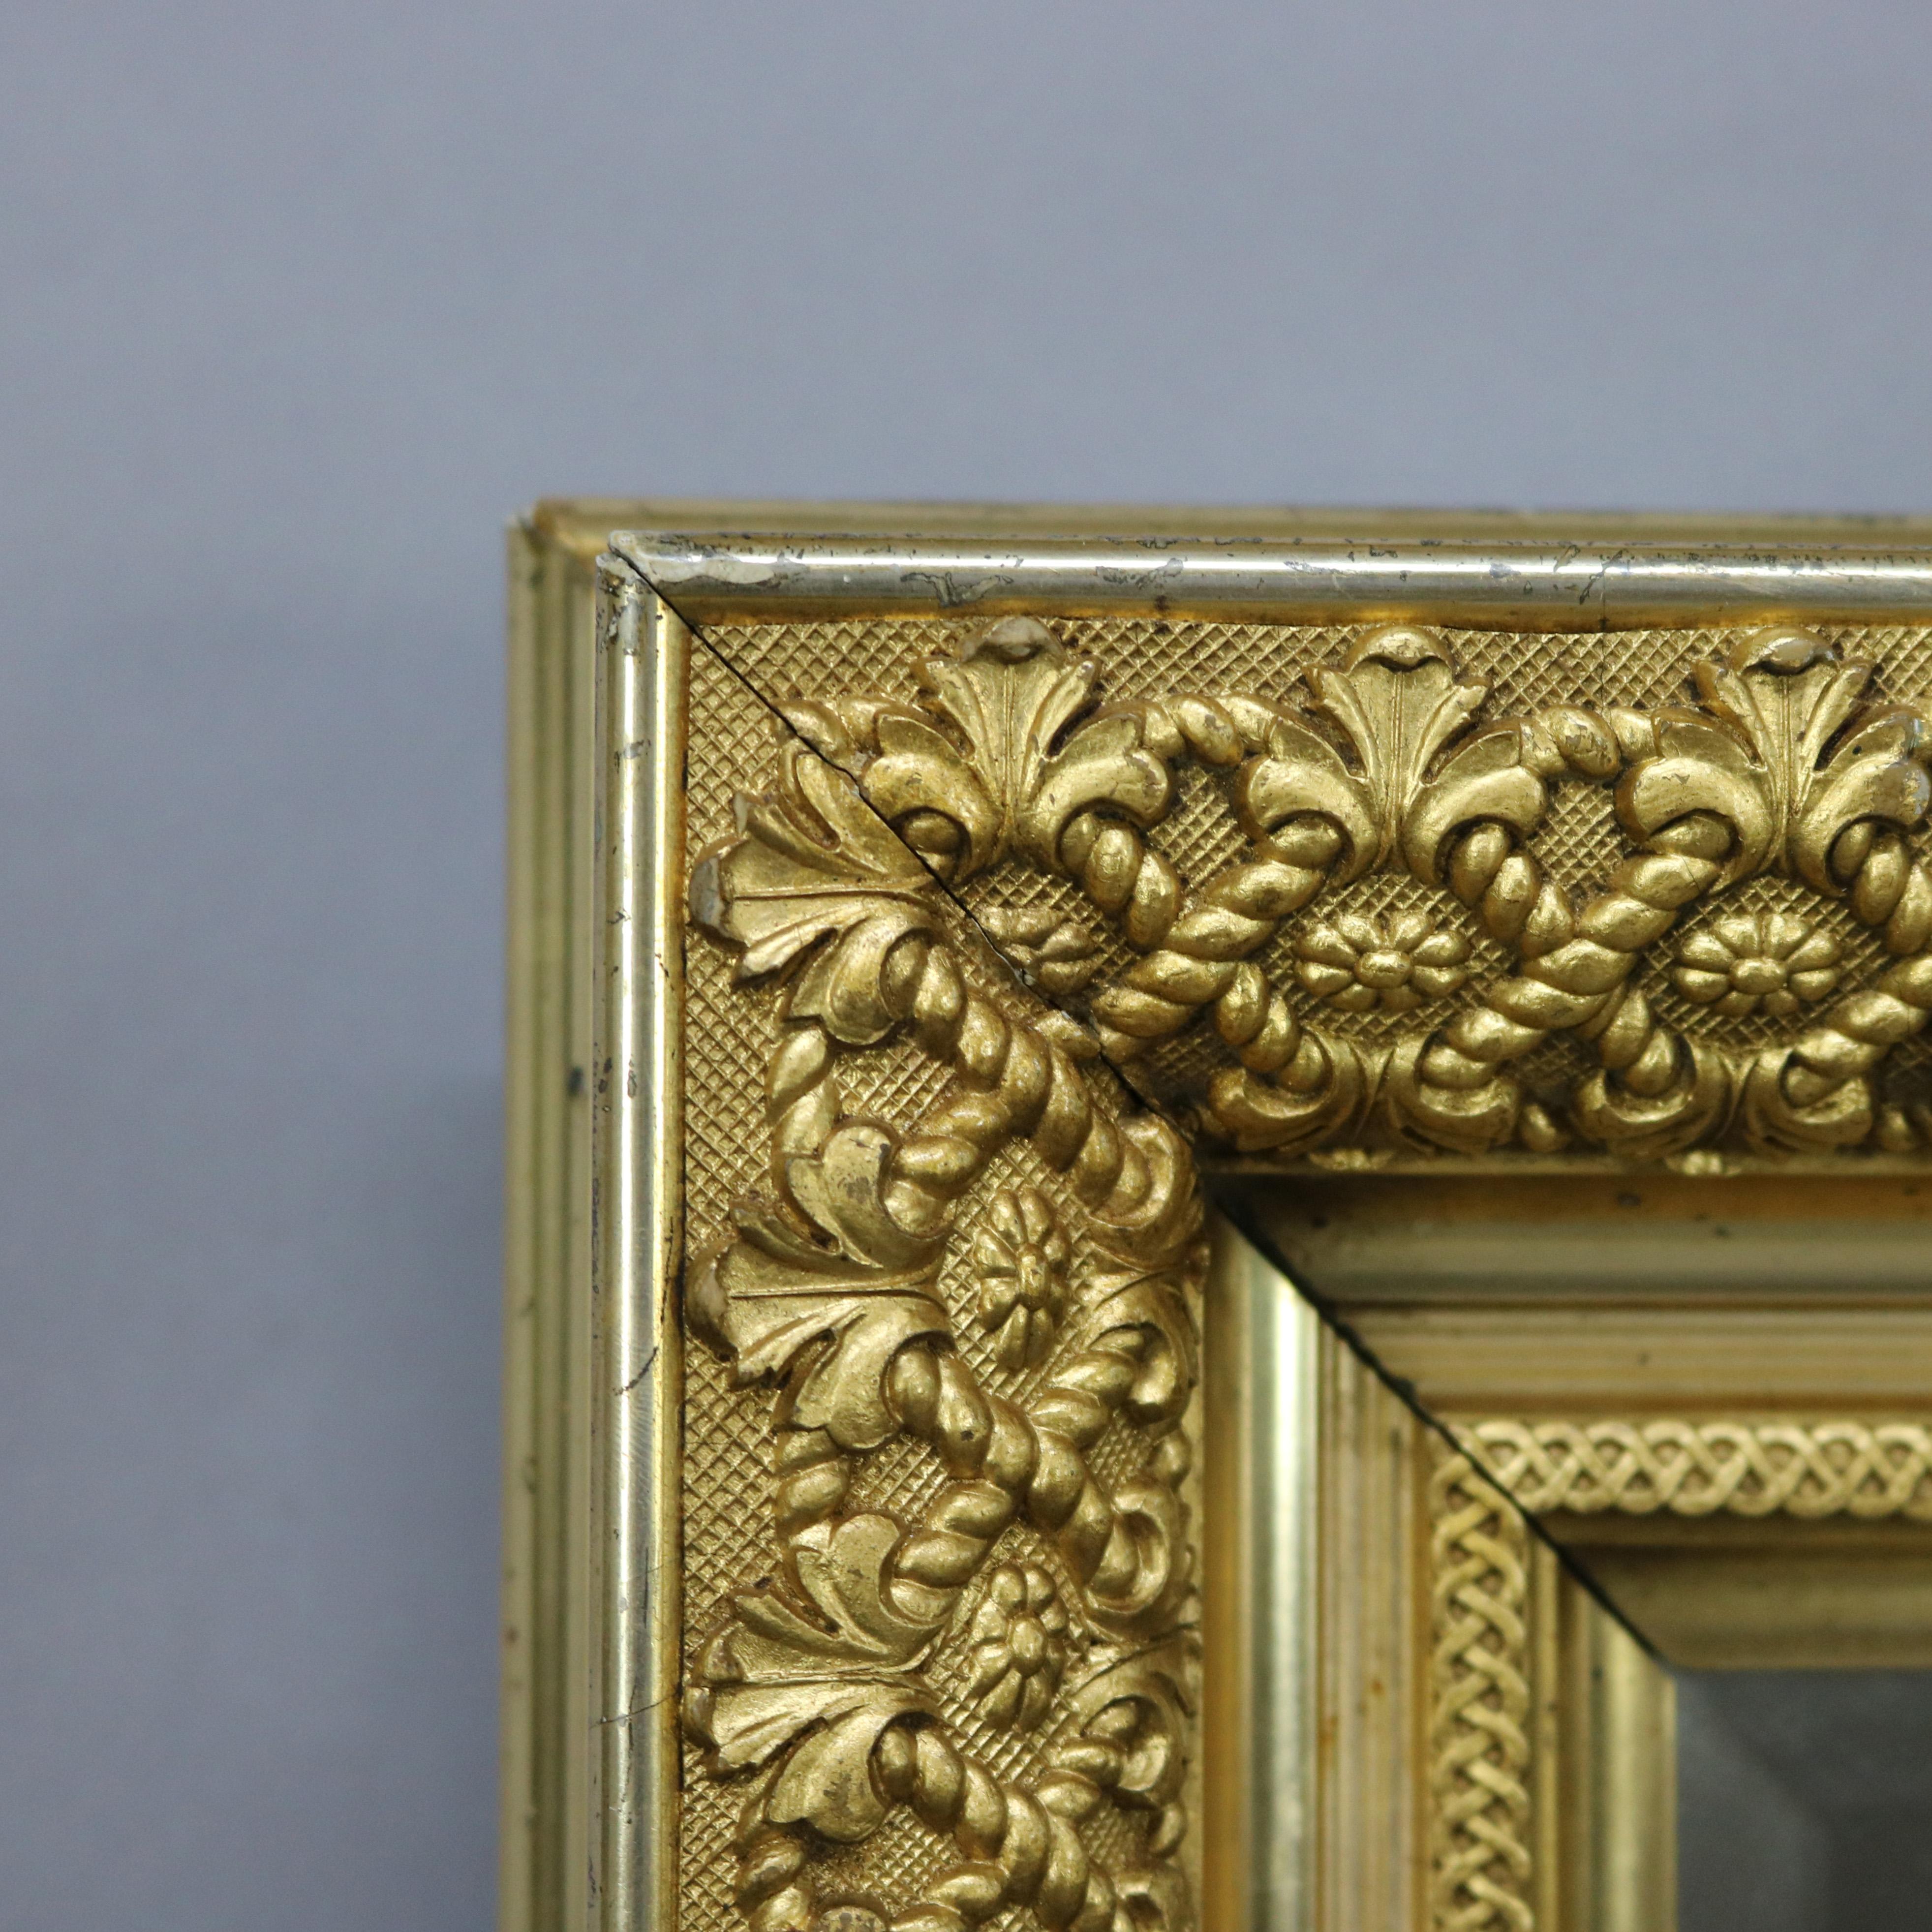 An antique wall mirror offers first finish giltwood construction with foliate decoration, c1890

Measures: 26.5